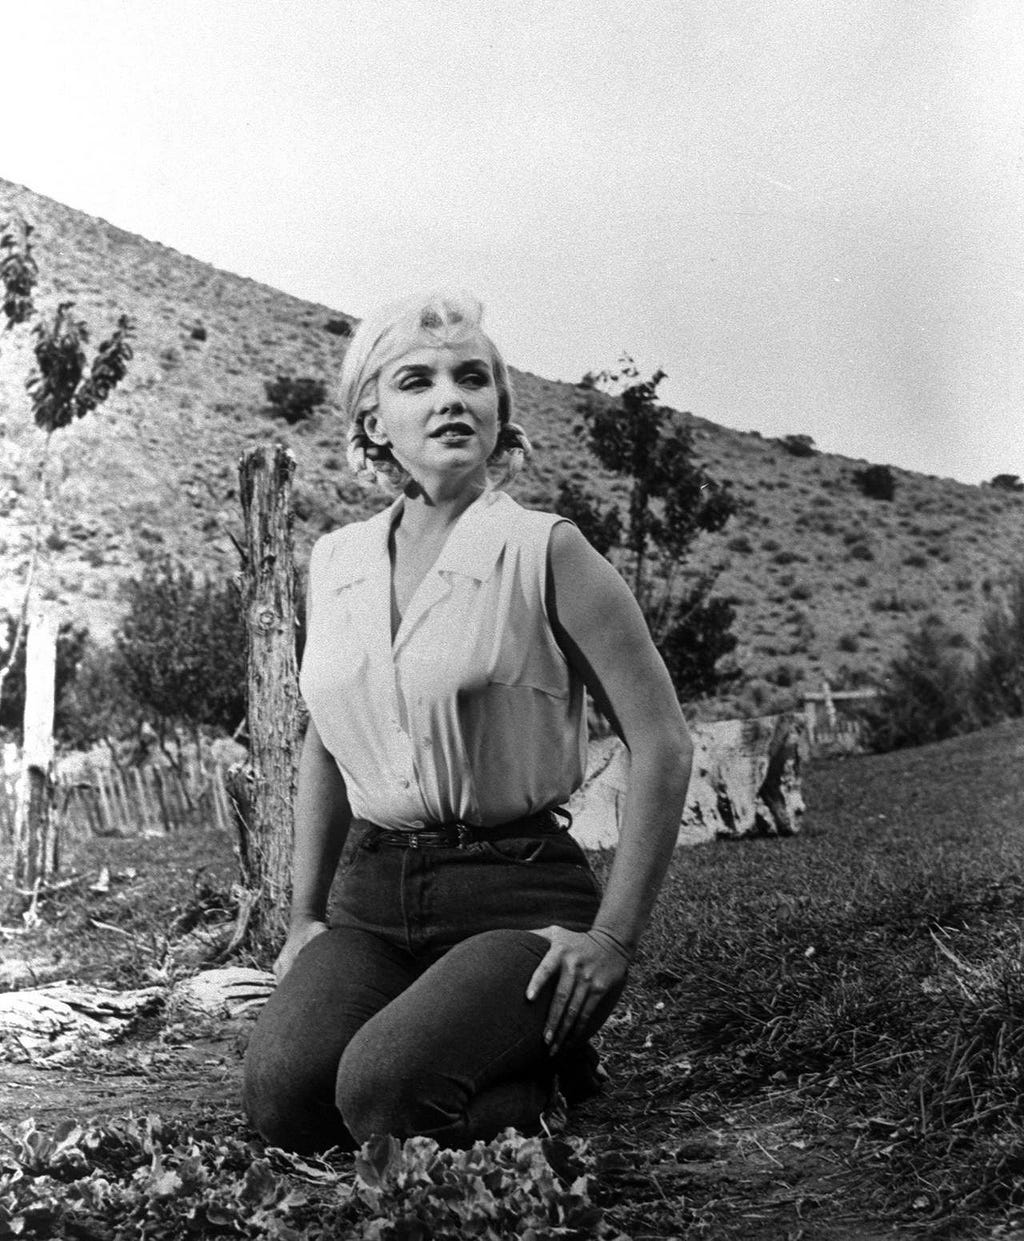 A black and white photo of Marilyn Monroe wearing a white tank top tucked into high-waisted jeans. She’s sitting on her knees